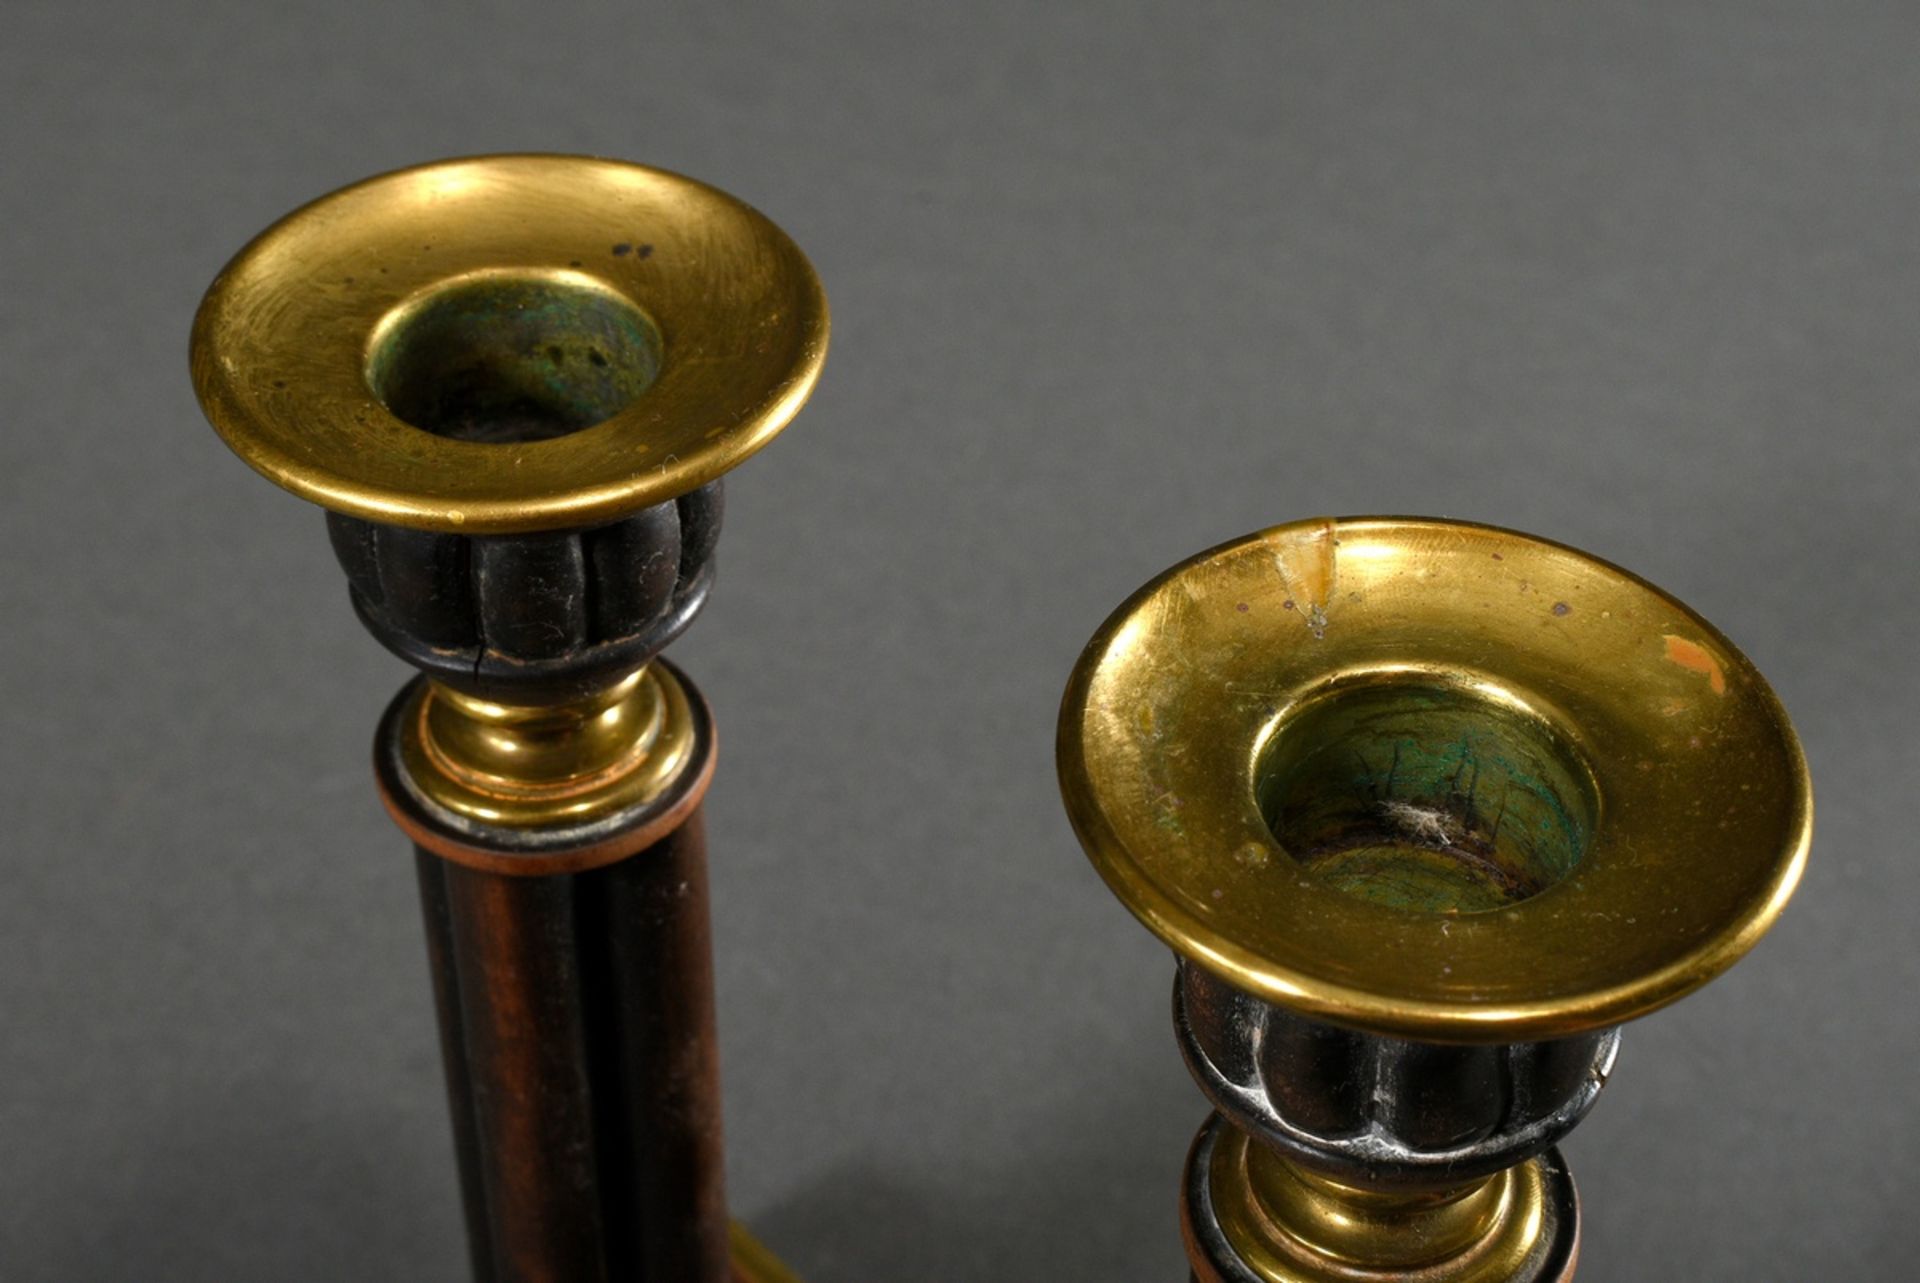 Pair of historicism candlesticks with carved spouts, shafts and feet in brass mounts, probably Engl - Image 2 of 3